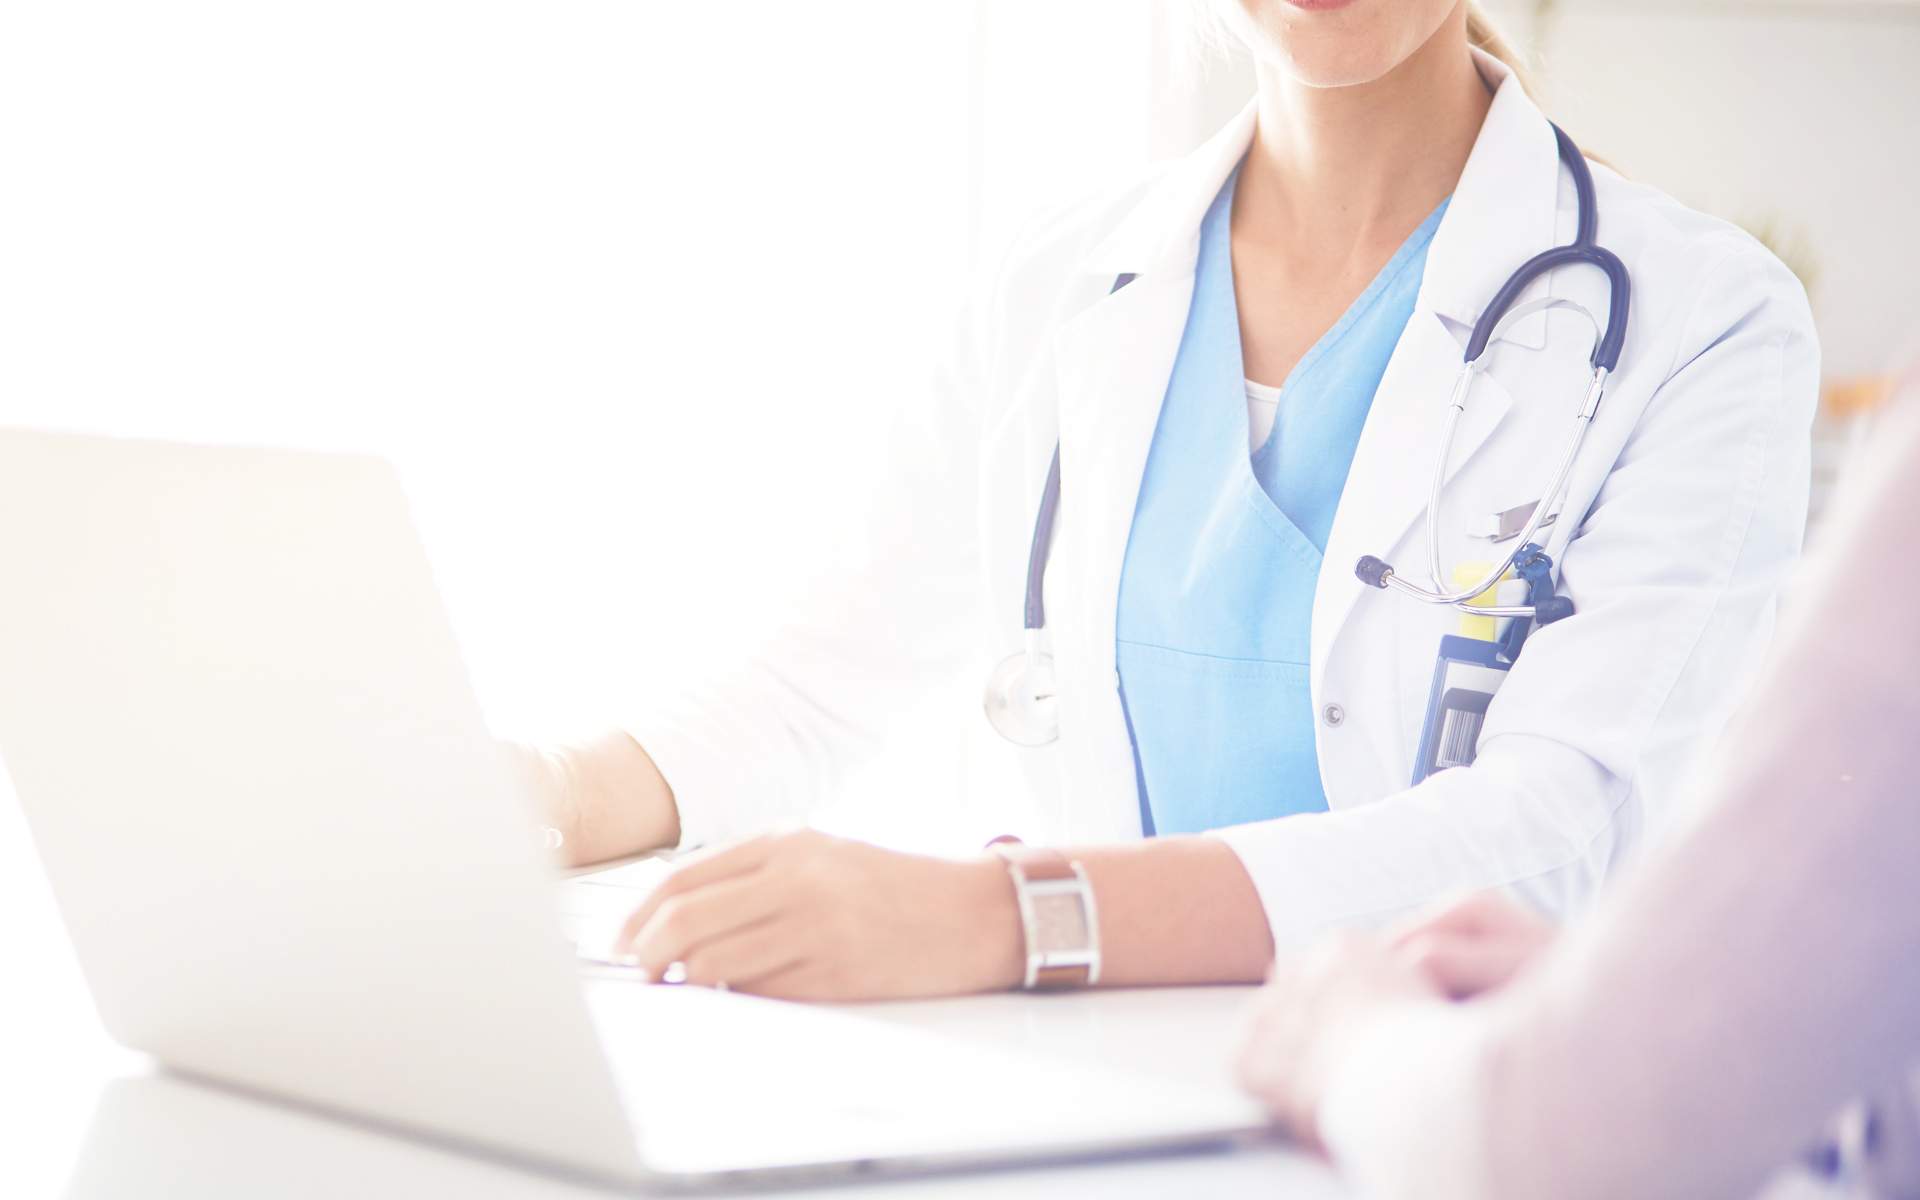 Image for 6 Common Health Insurance Terms Everyone Should Know. An image of a female doctor sitting at a desk with a laptop.